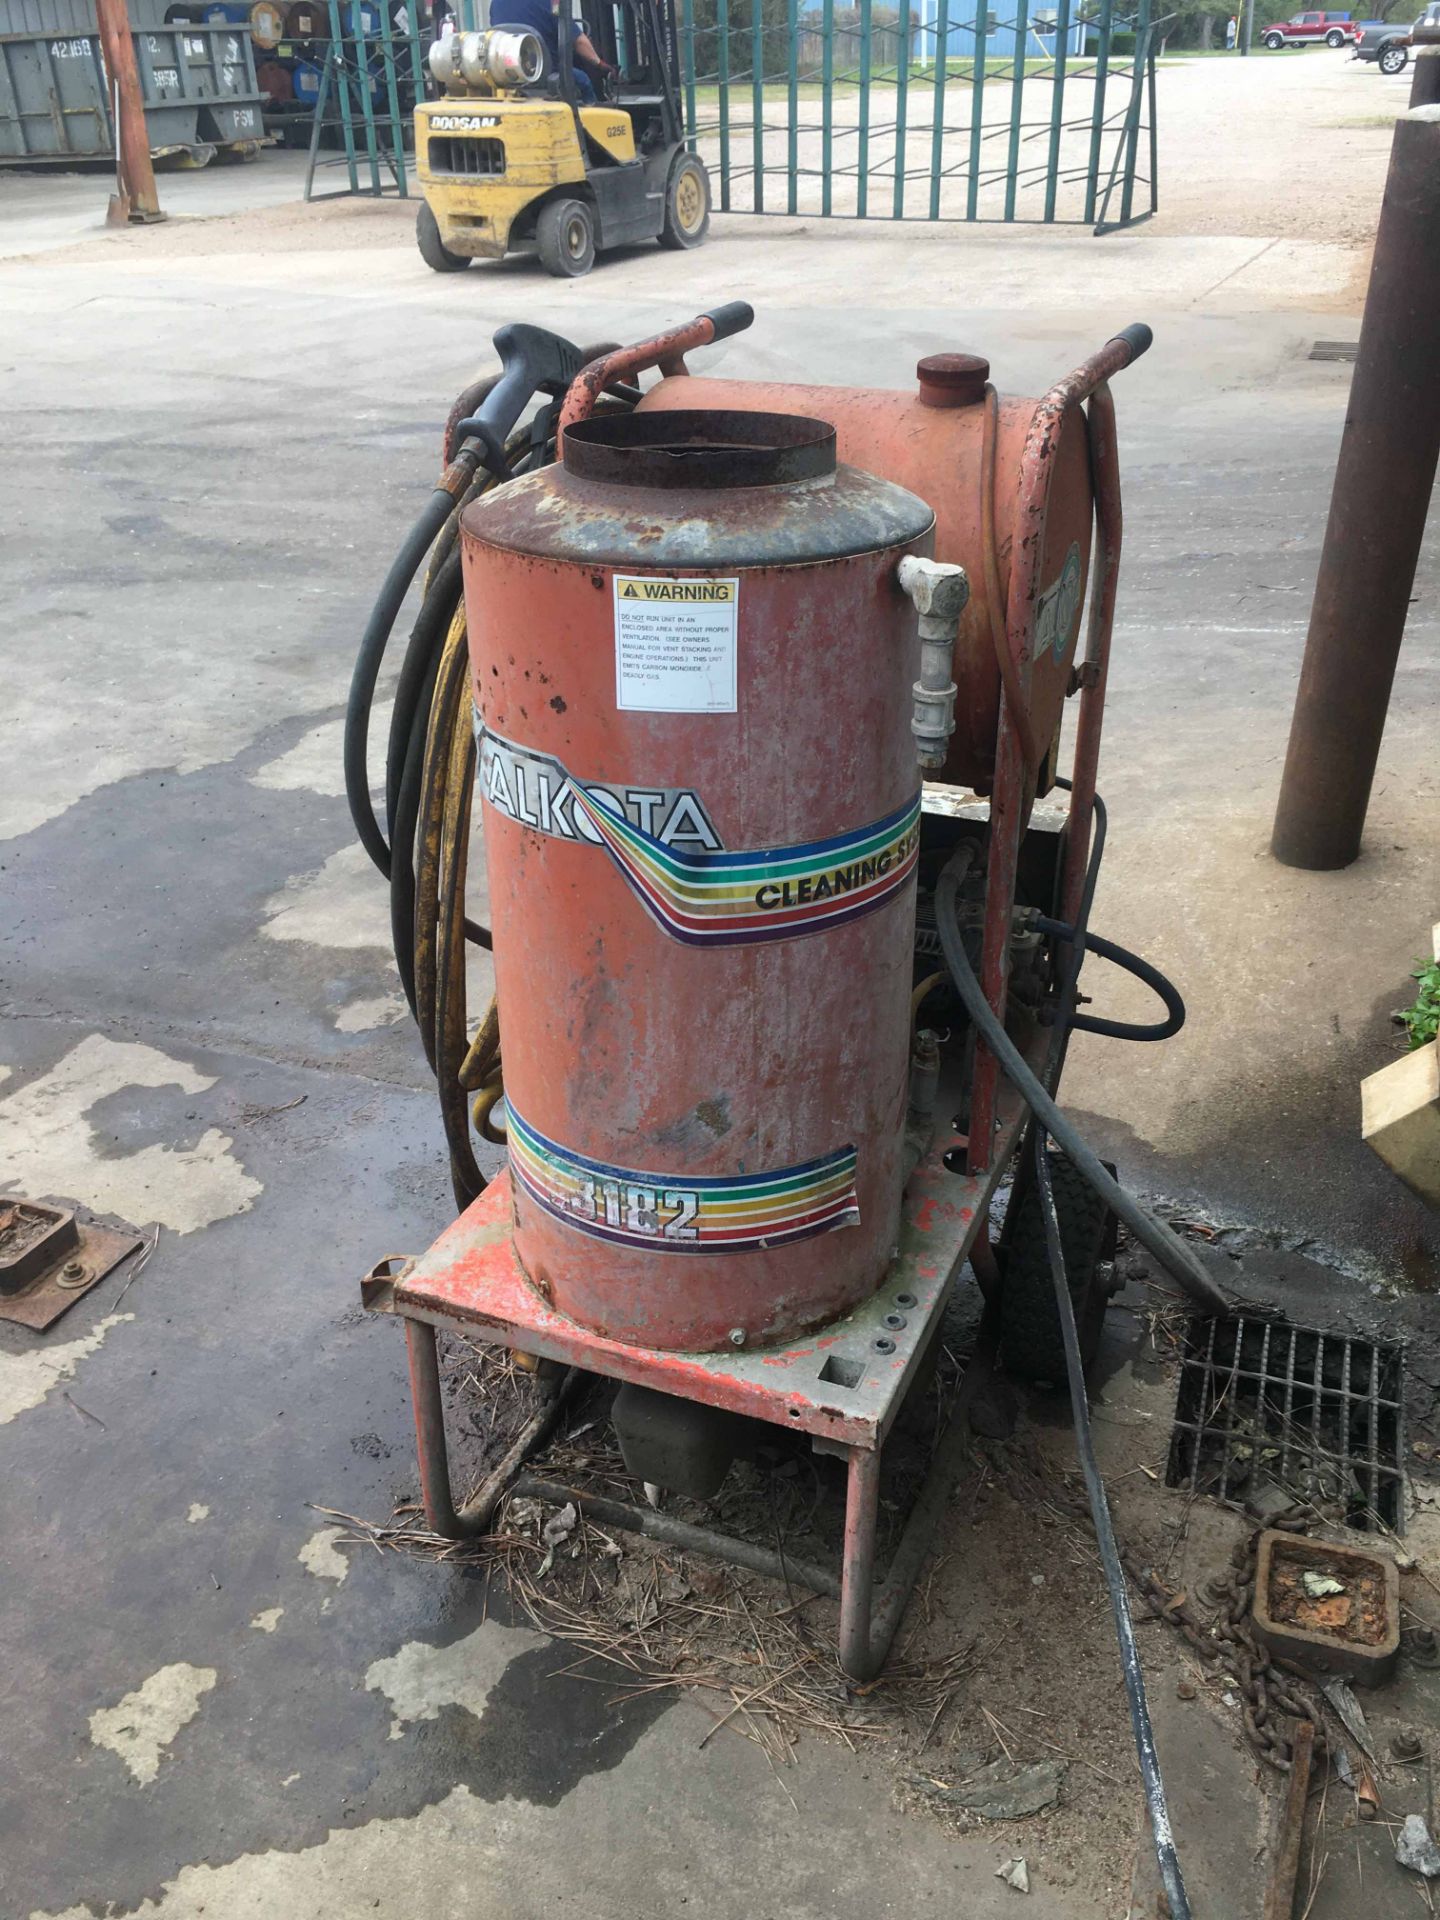 DIESEL FIRED PRESSURE WASHER, ALKOTA, electric pump - Image 2 of 2